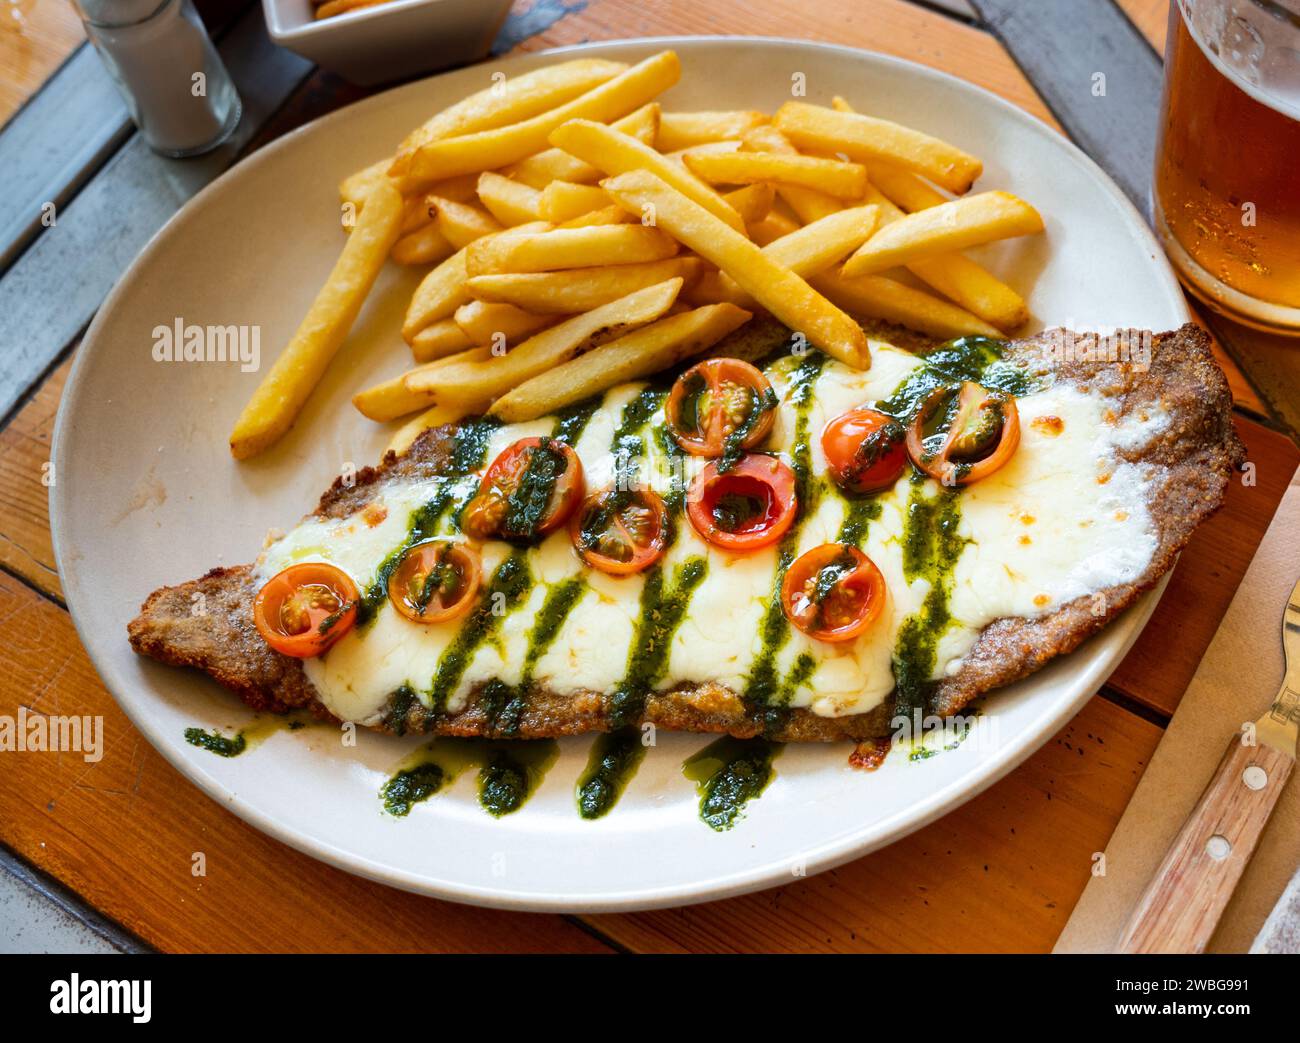 Beef steak with mozzarella, tomatoes and pesto served with fries Stock Photo